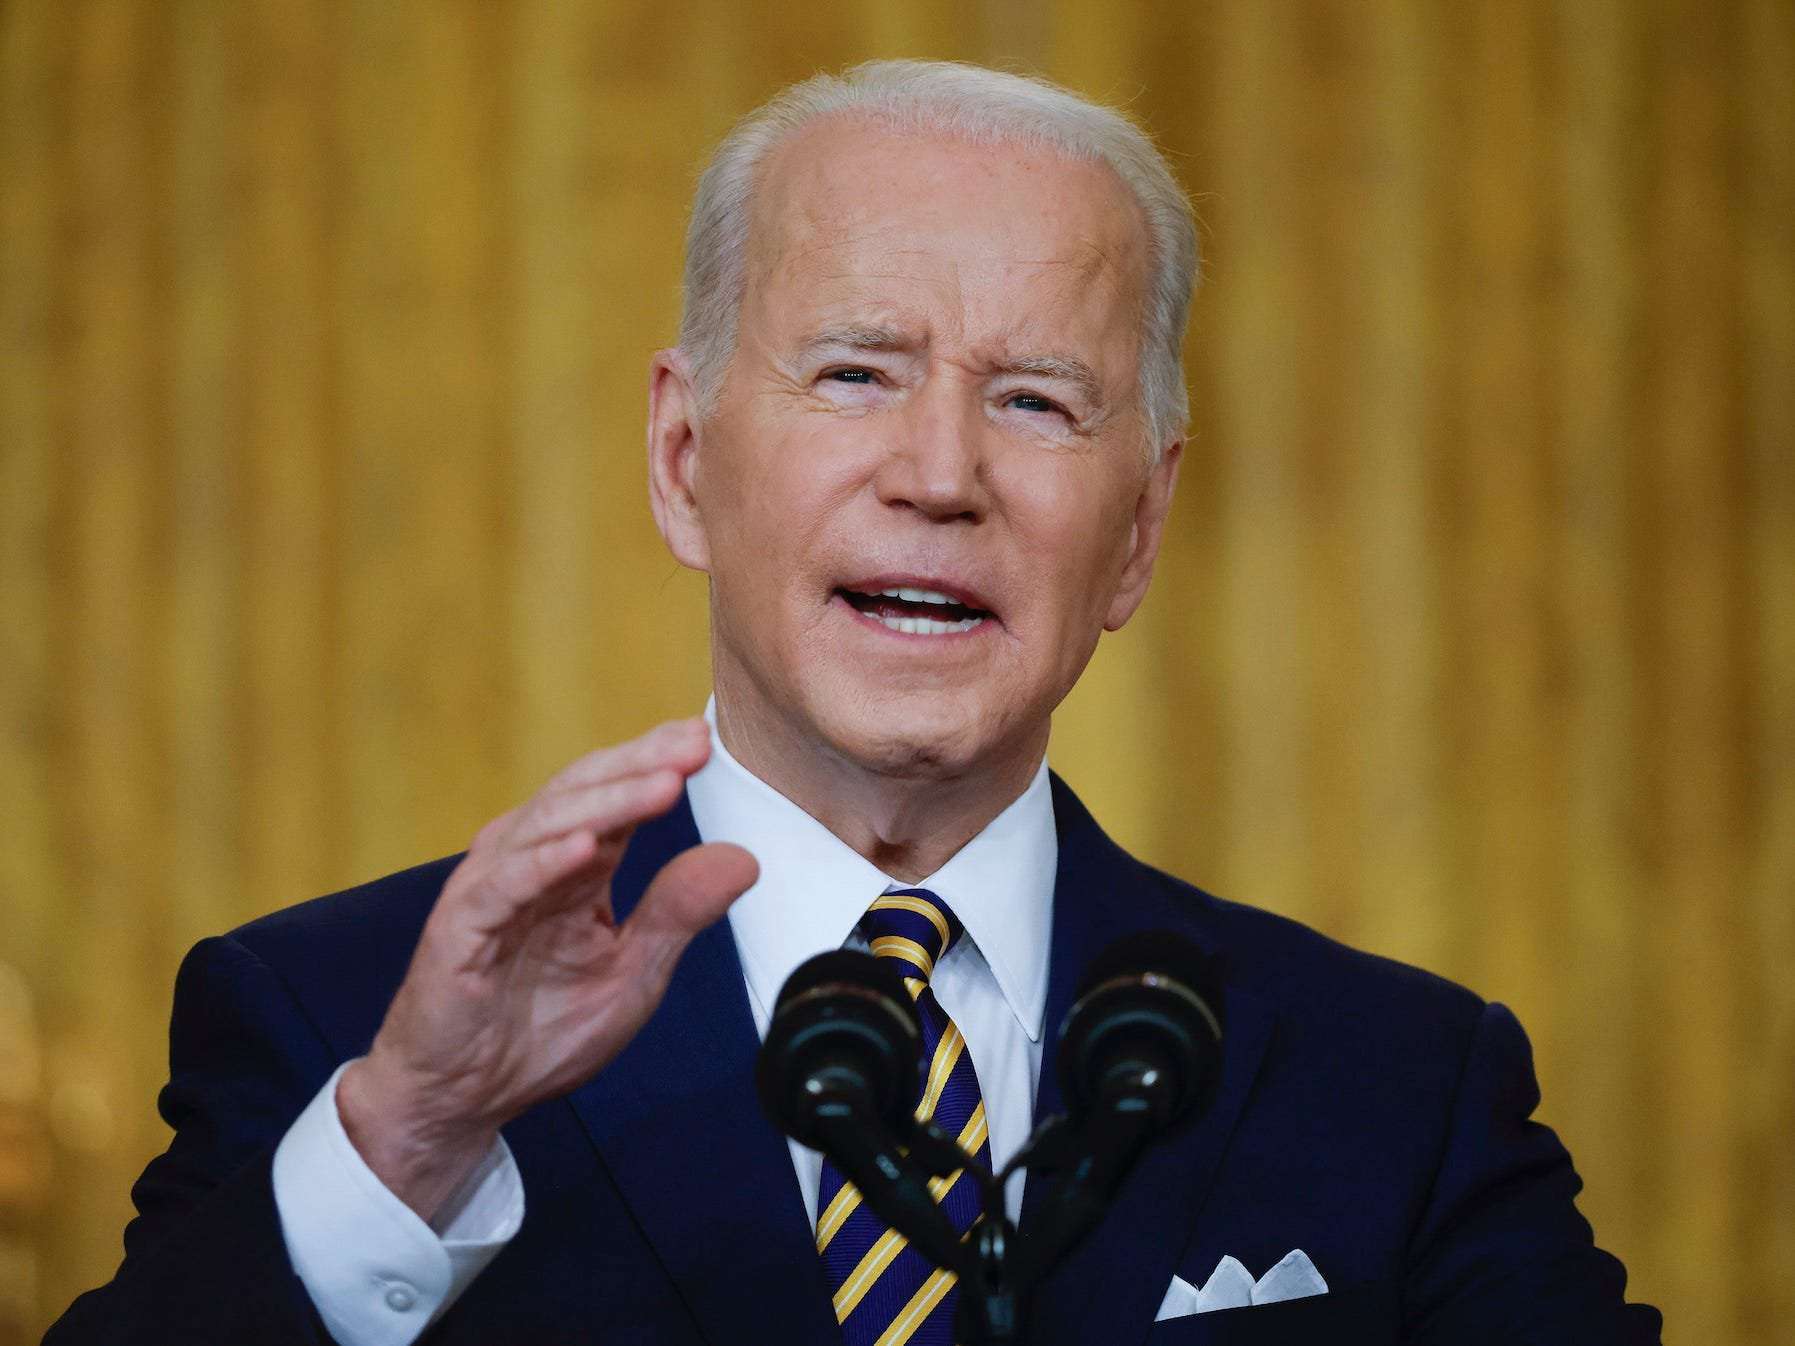 image for Biden criticizes GOP resistance to his agenda: ‘What are Republicans for? Name me one thing they’re for’